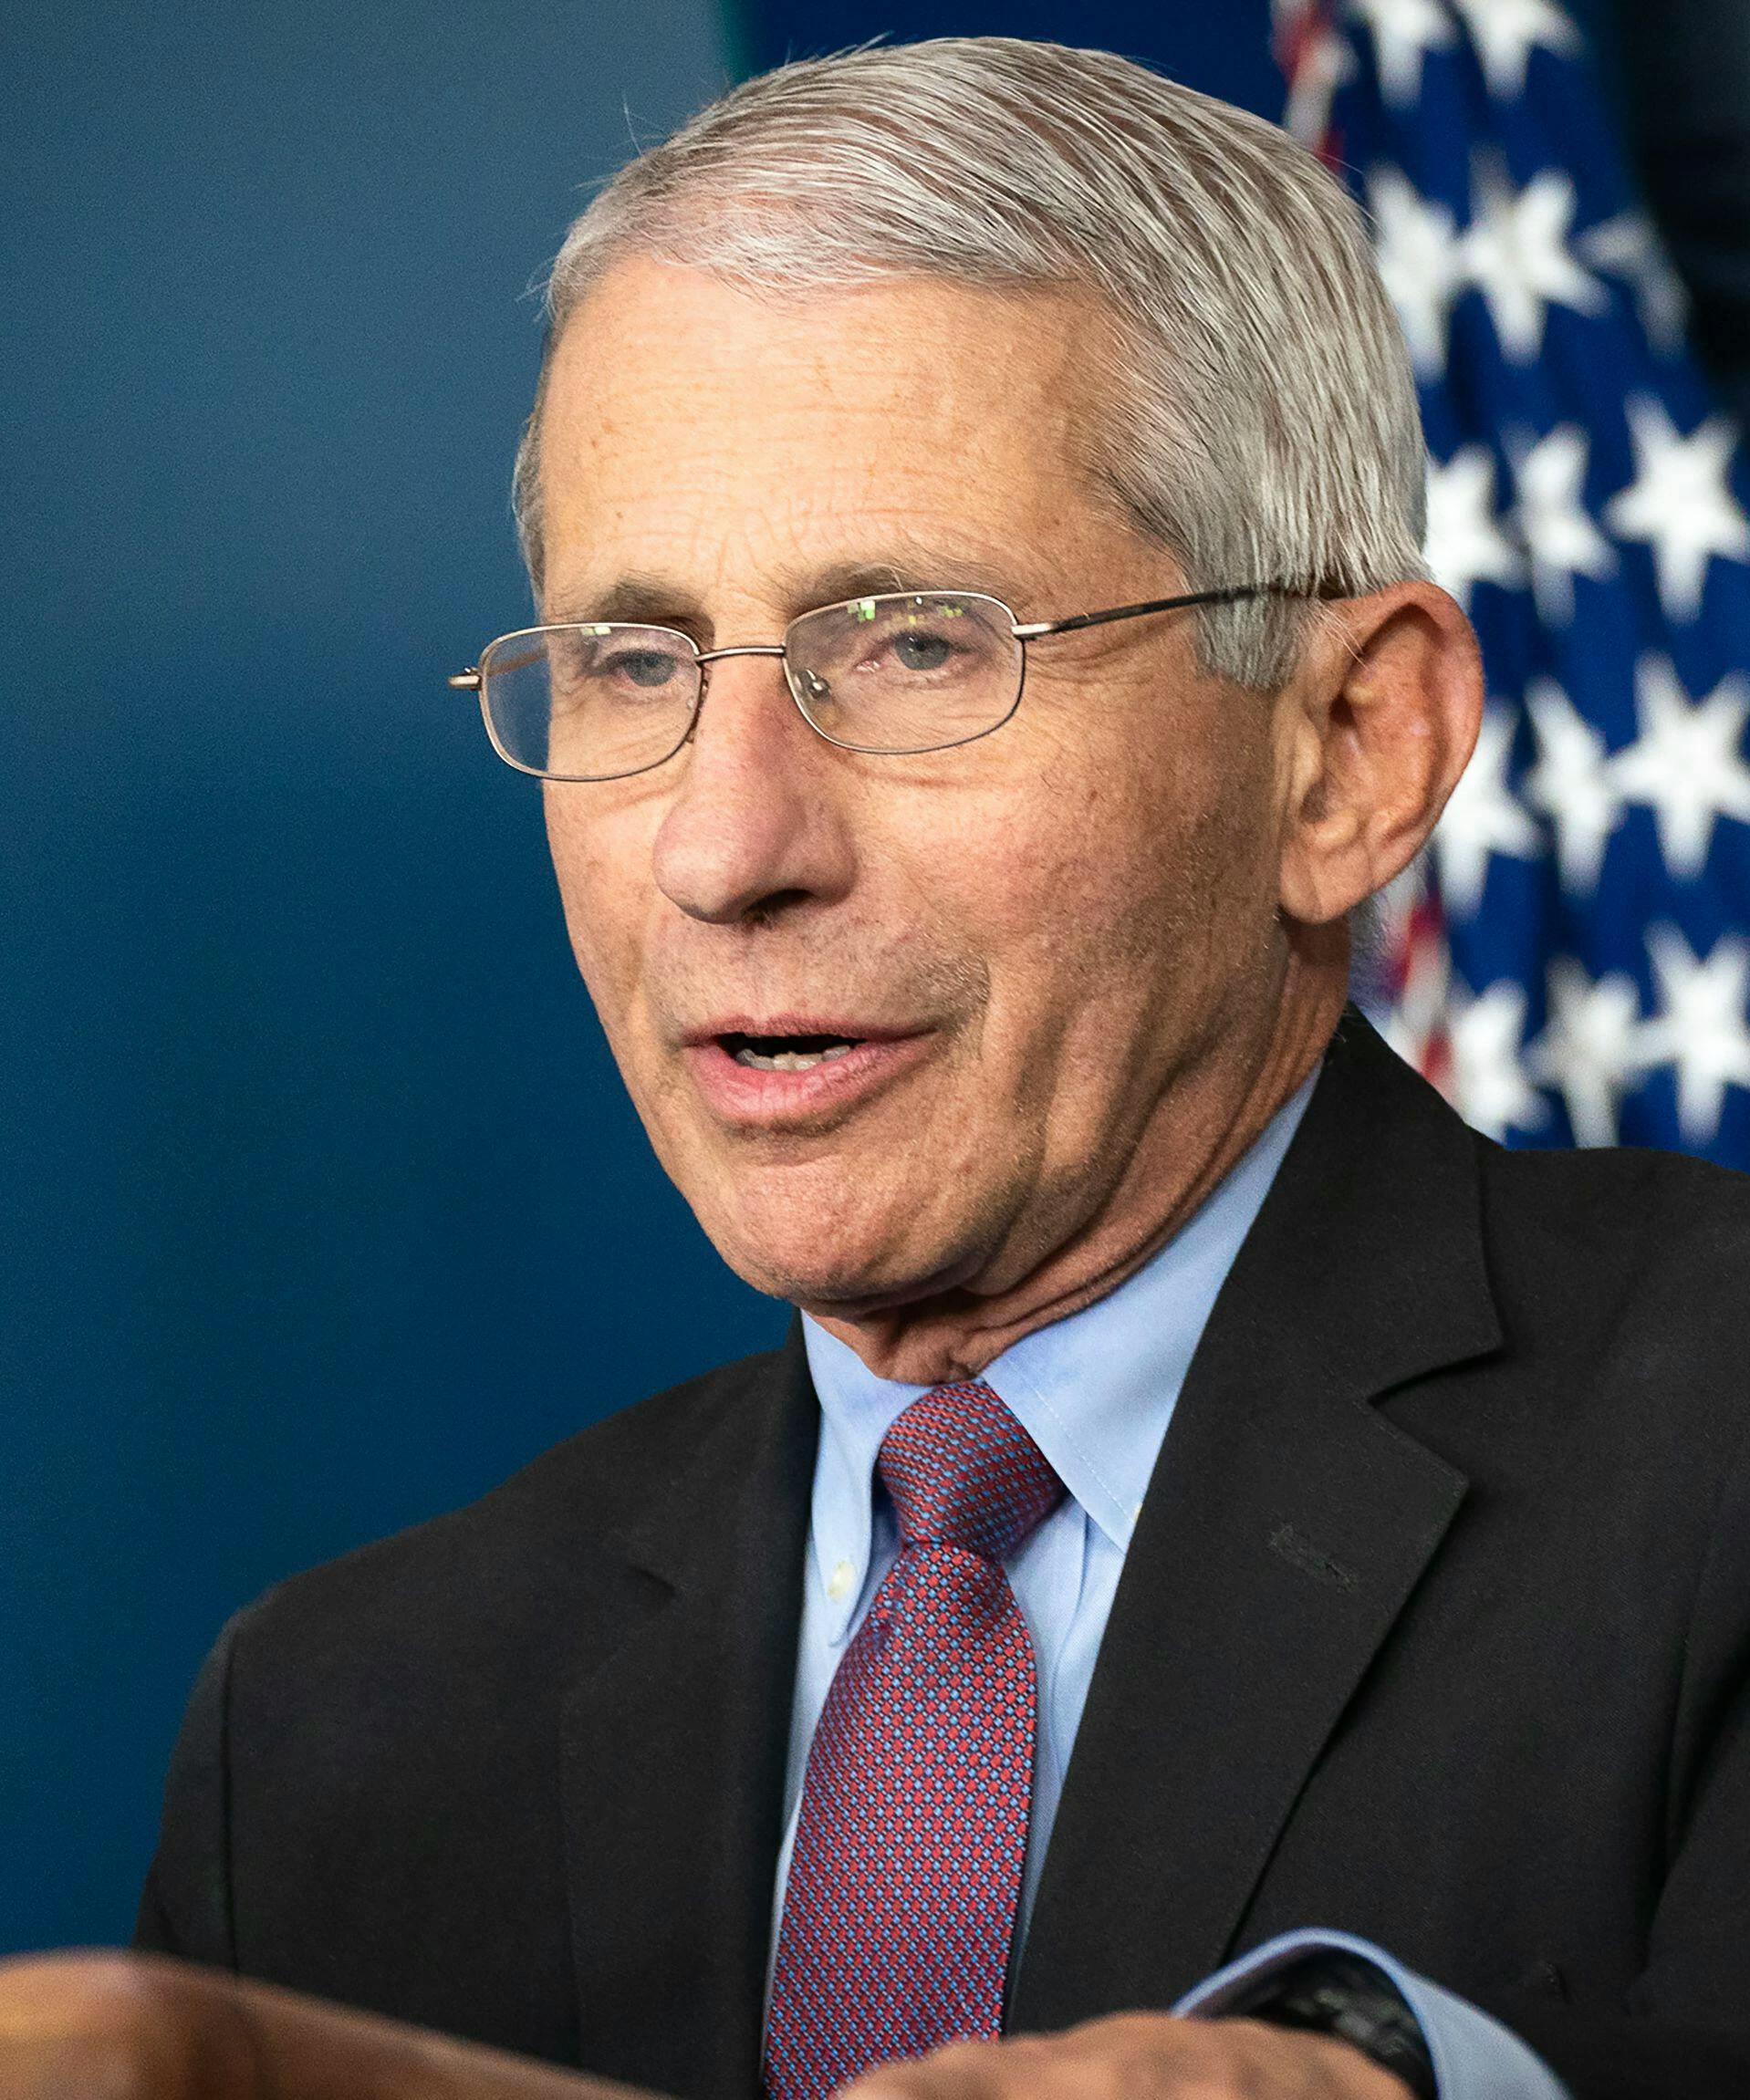 Dr. Fauci Said Only Infected People Need To Wear Masks And More In Newly Released Emails